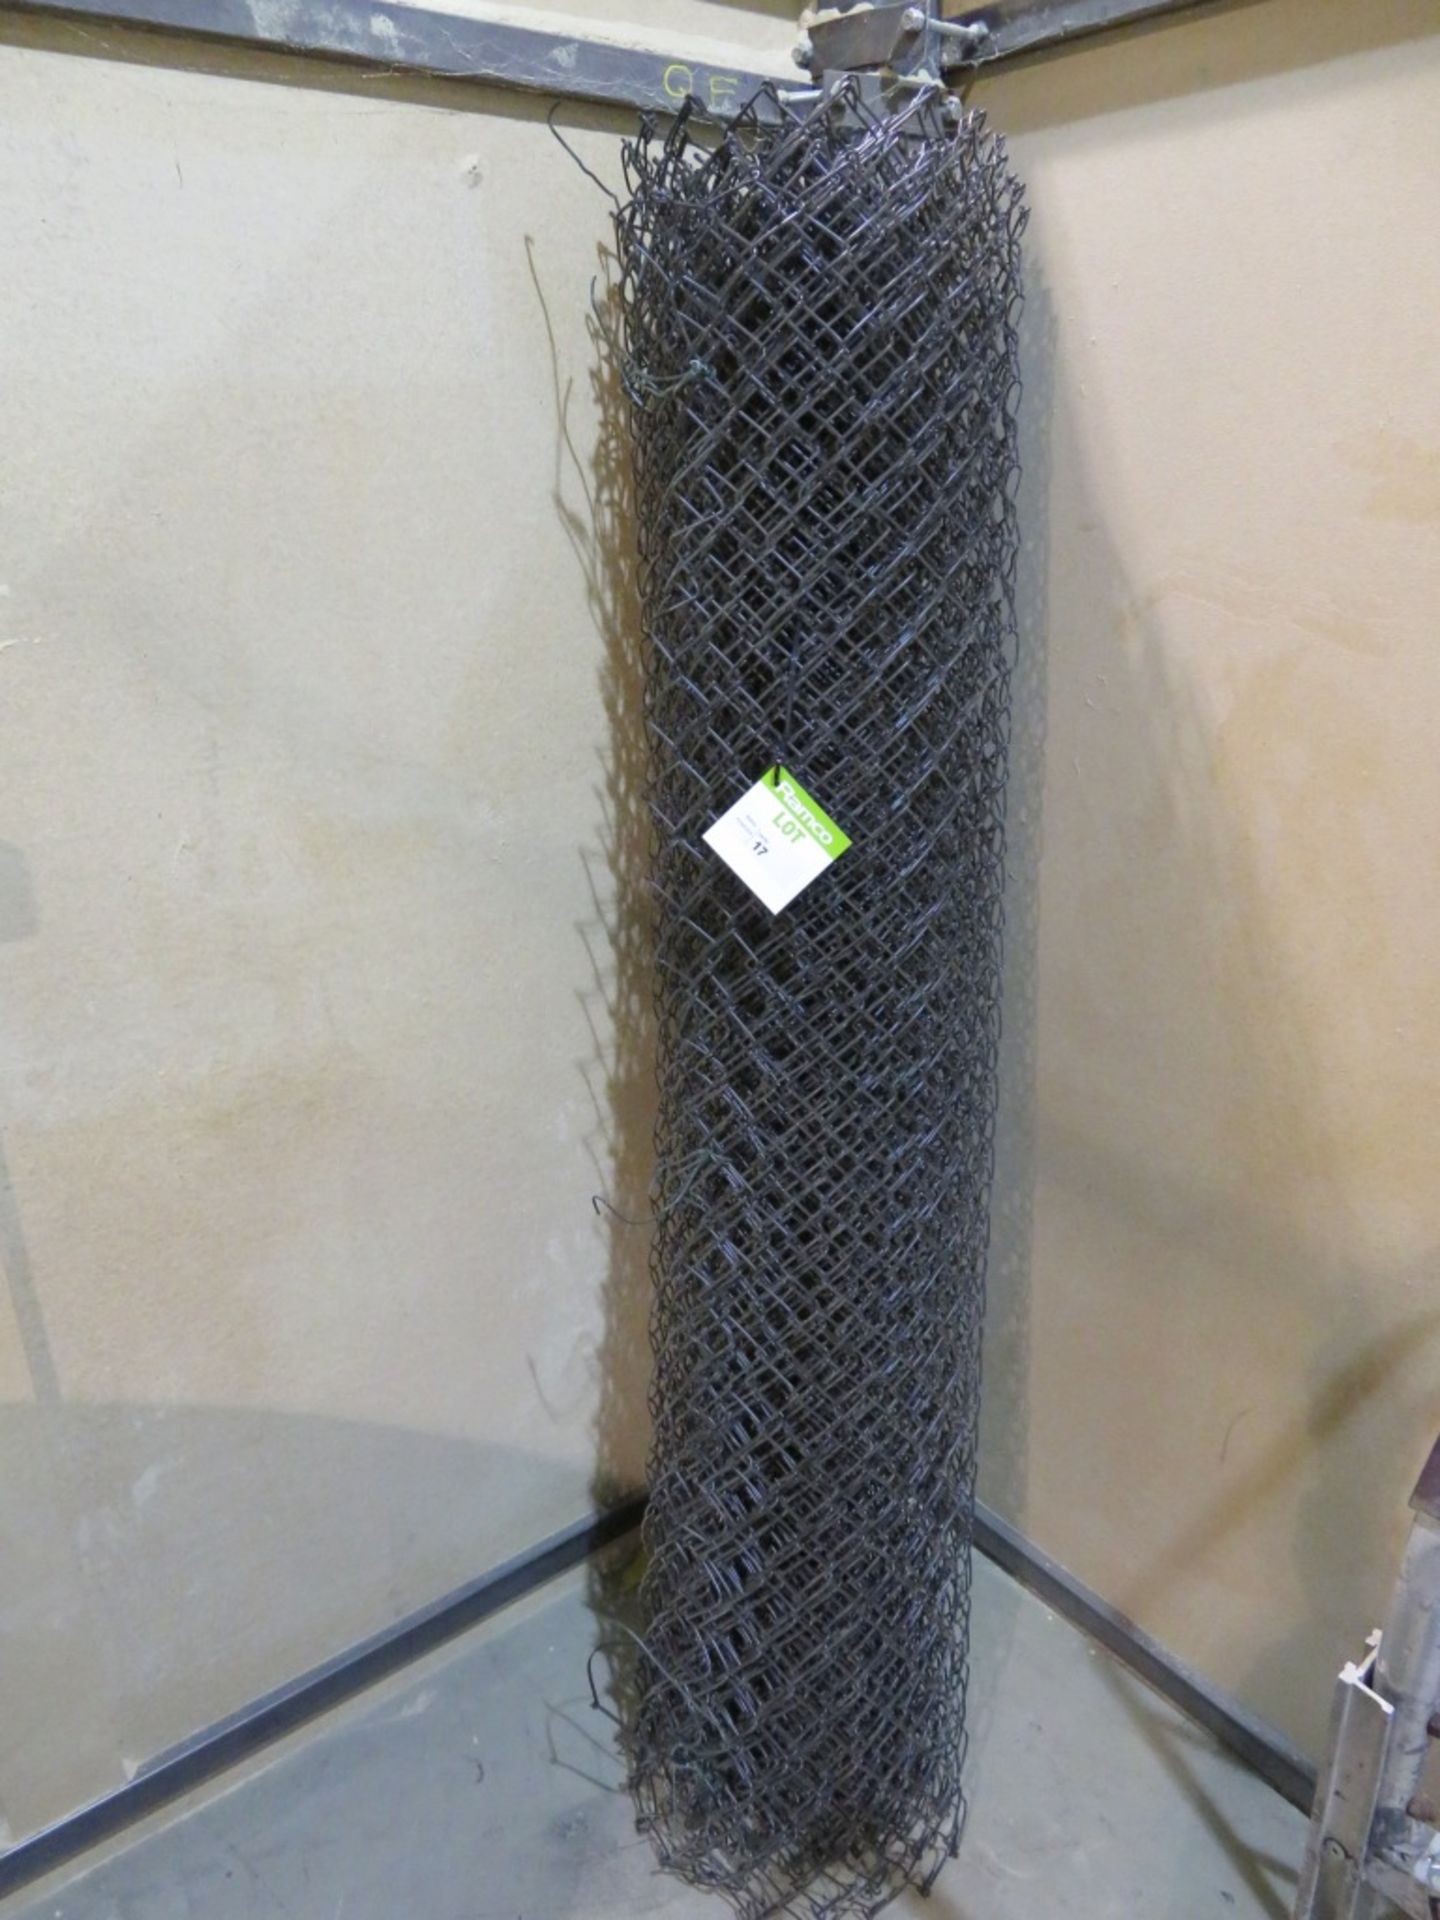 Roll of Plastic coated mesh fencing - unknown length